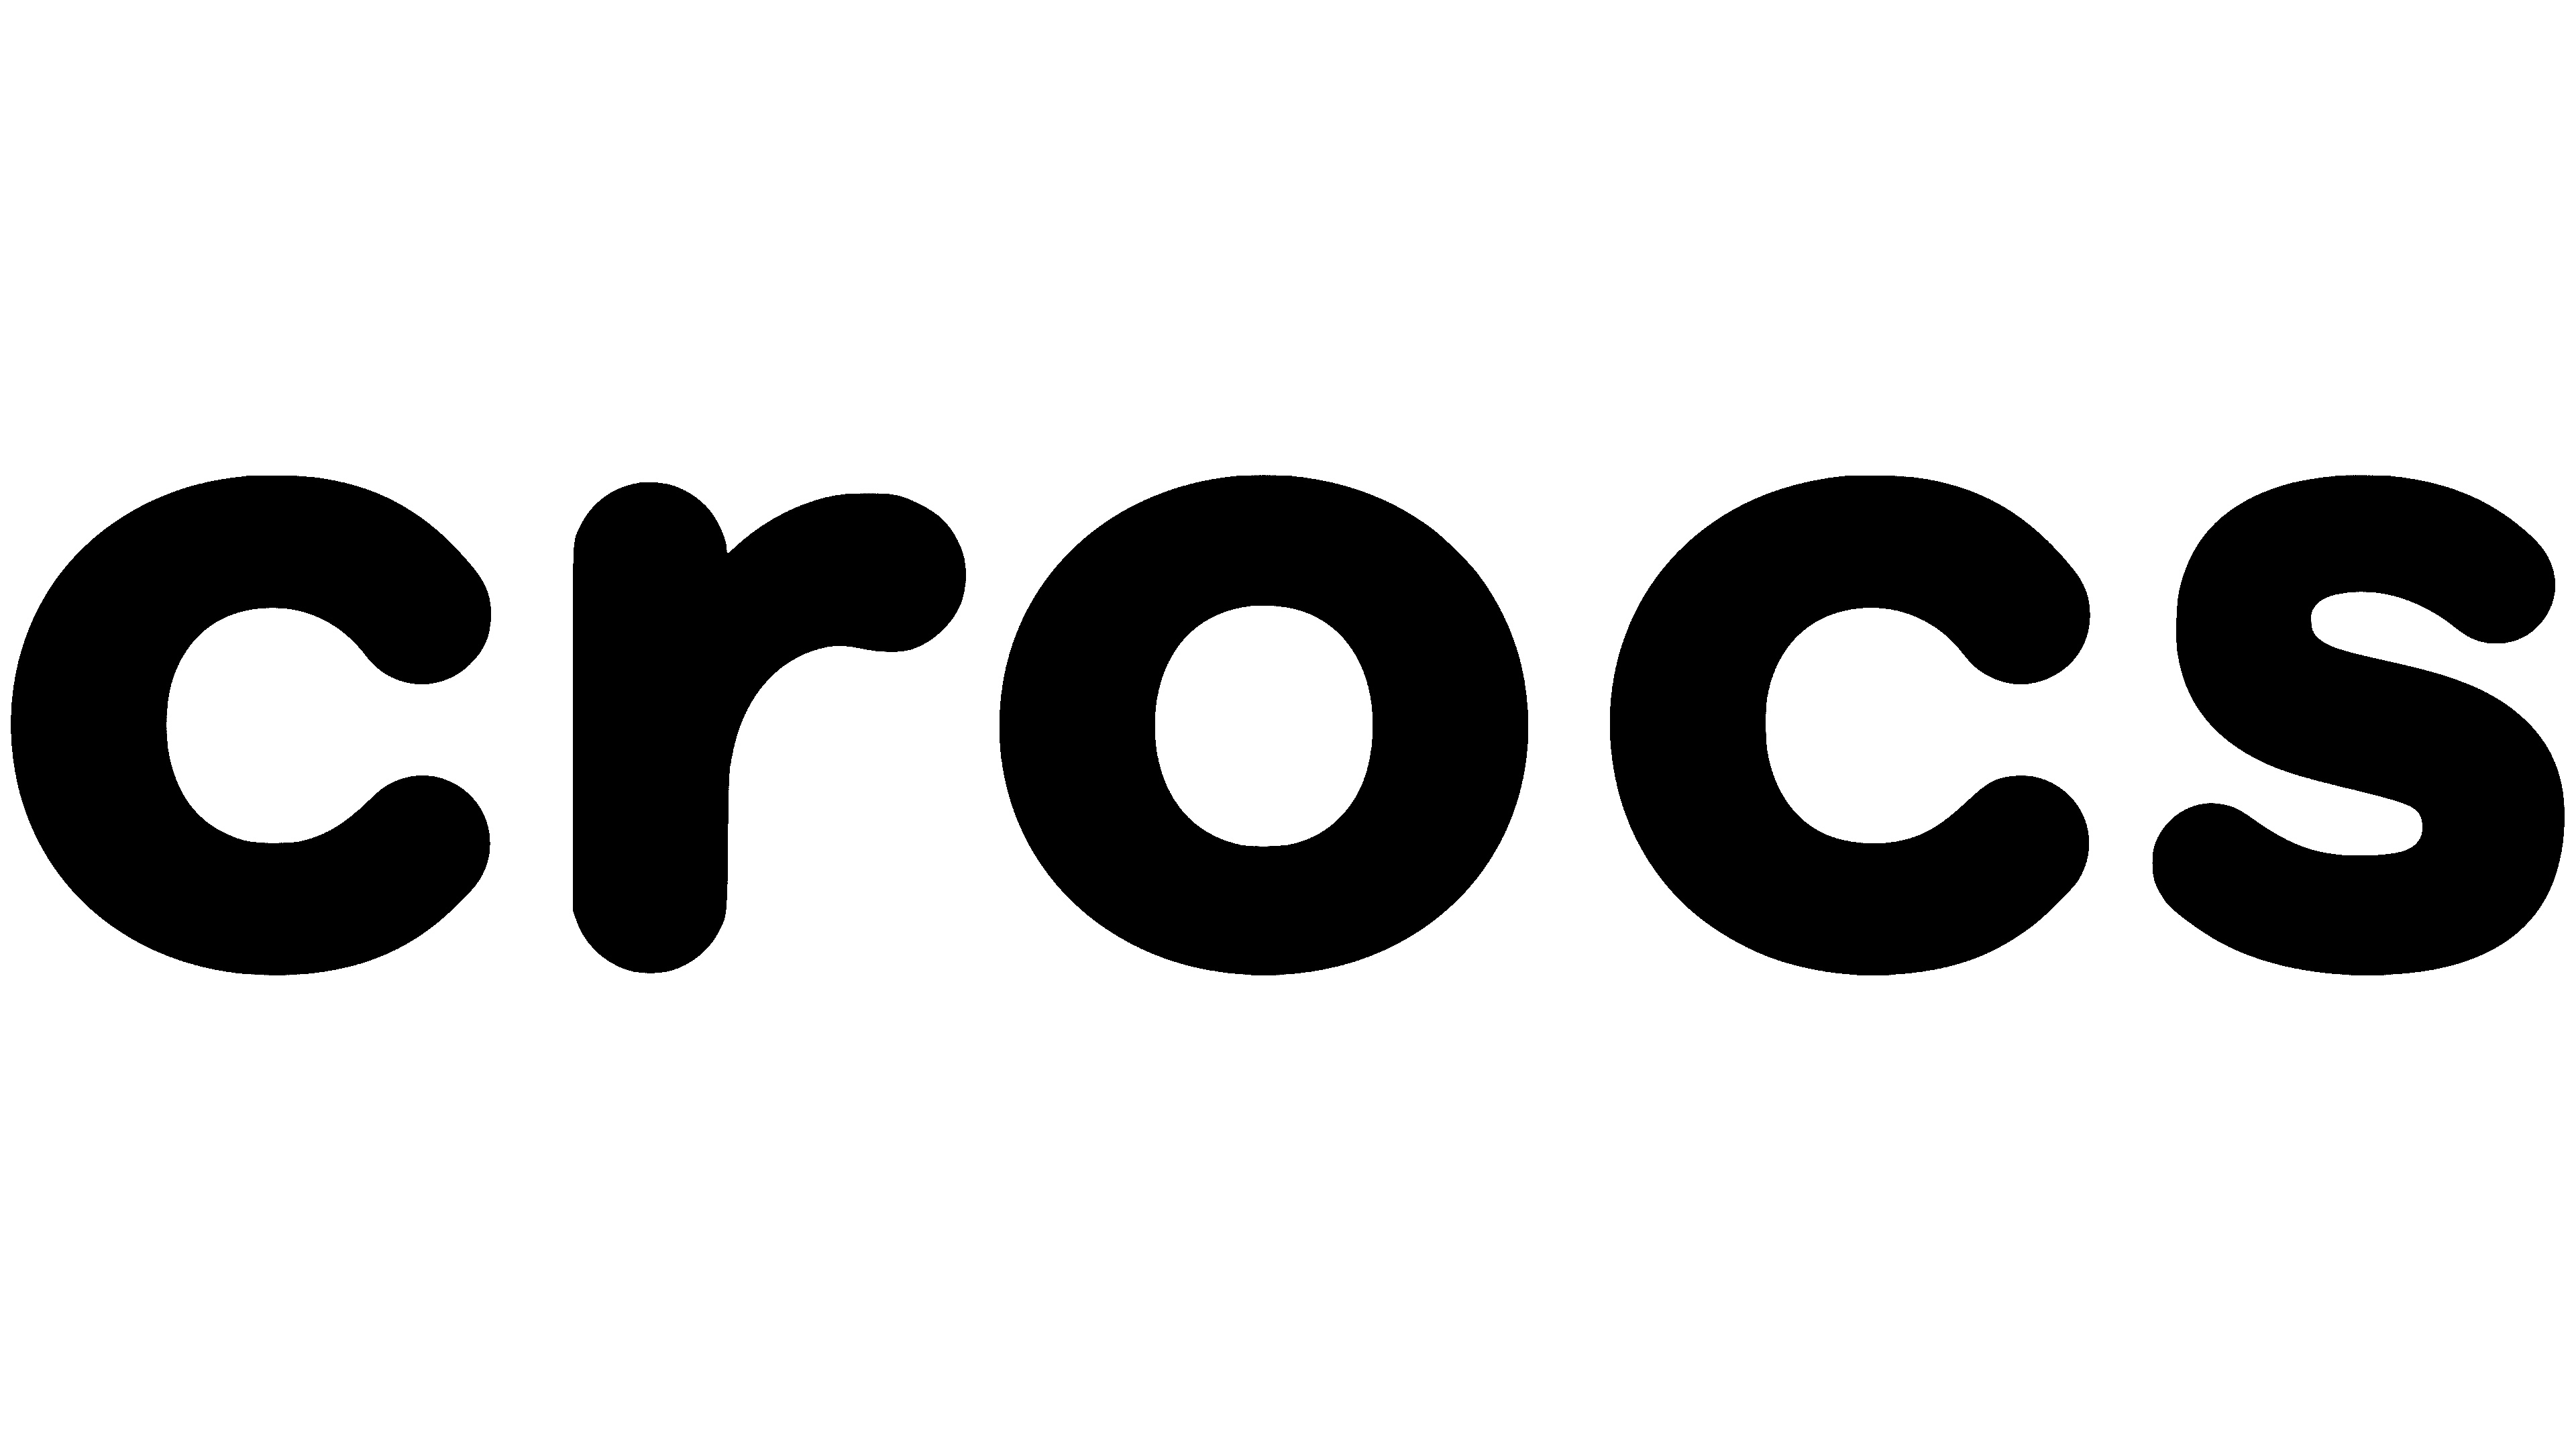 Crocs: Shoes made from a proprietary closed-cell resin known as “Croslite”, Black and white. 3840x2160 4K Background.